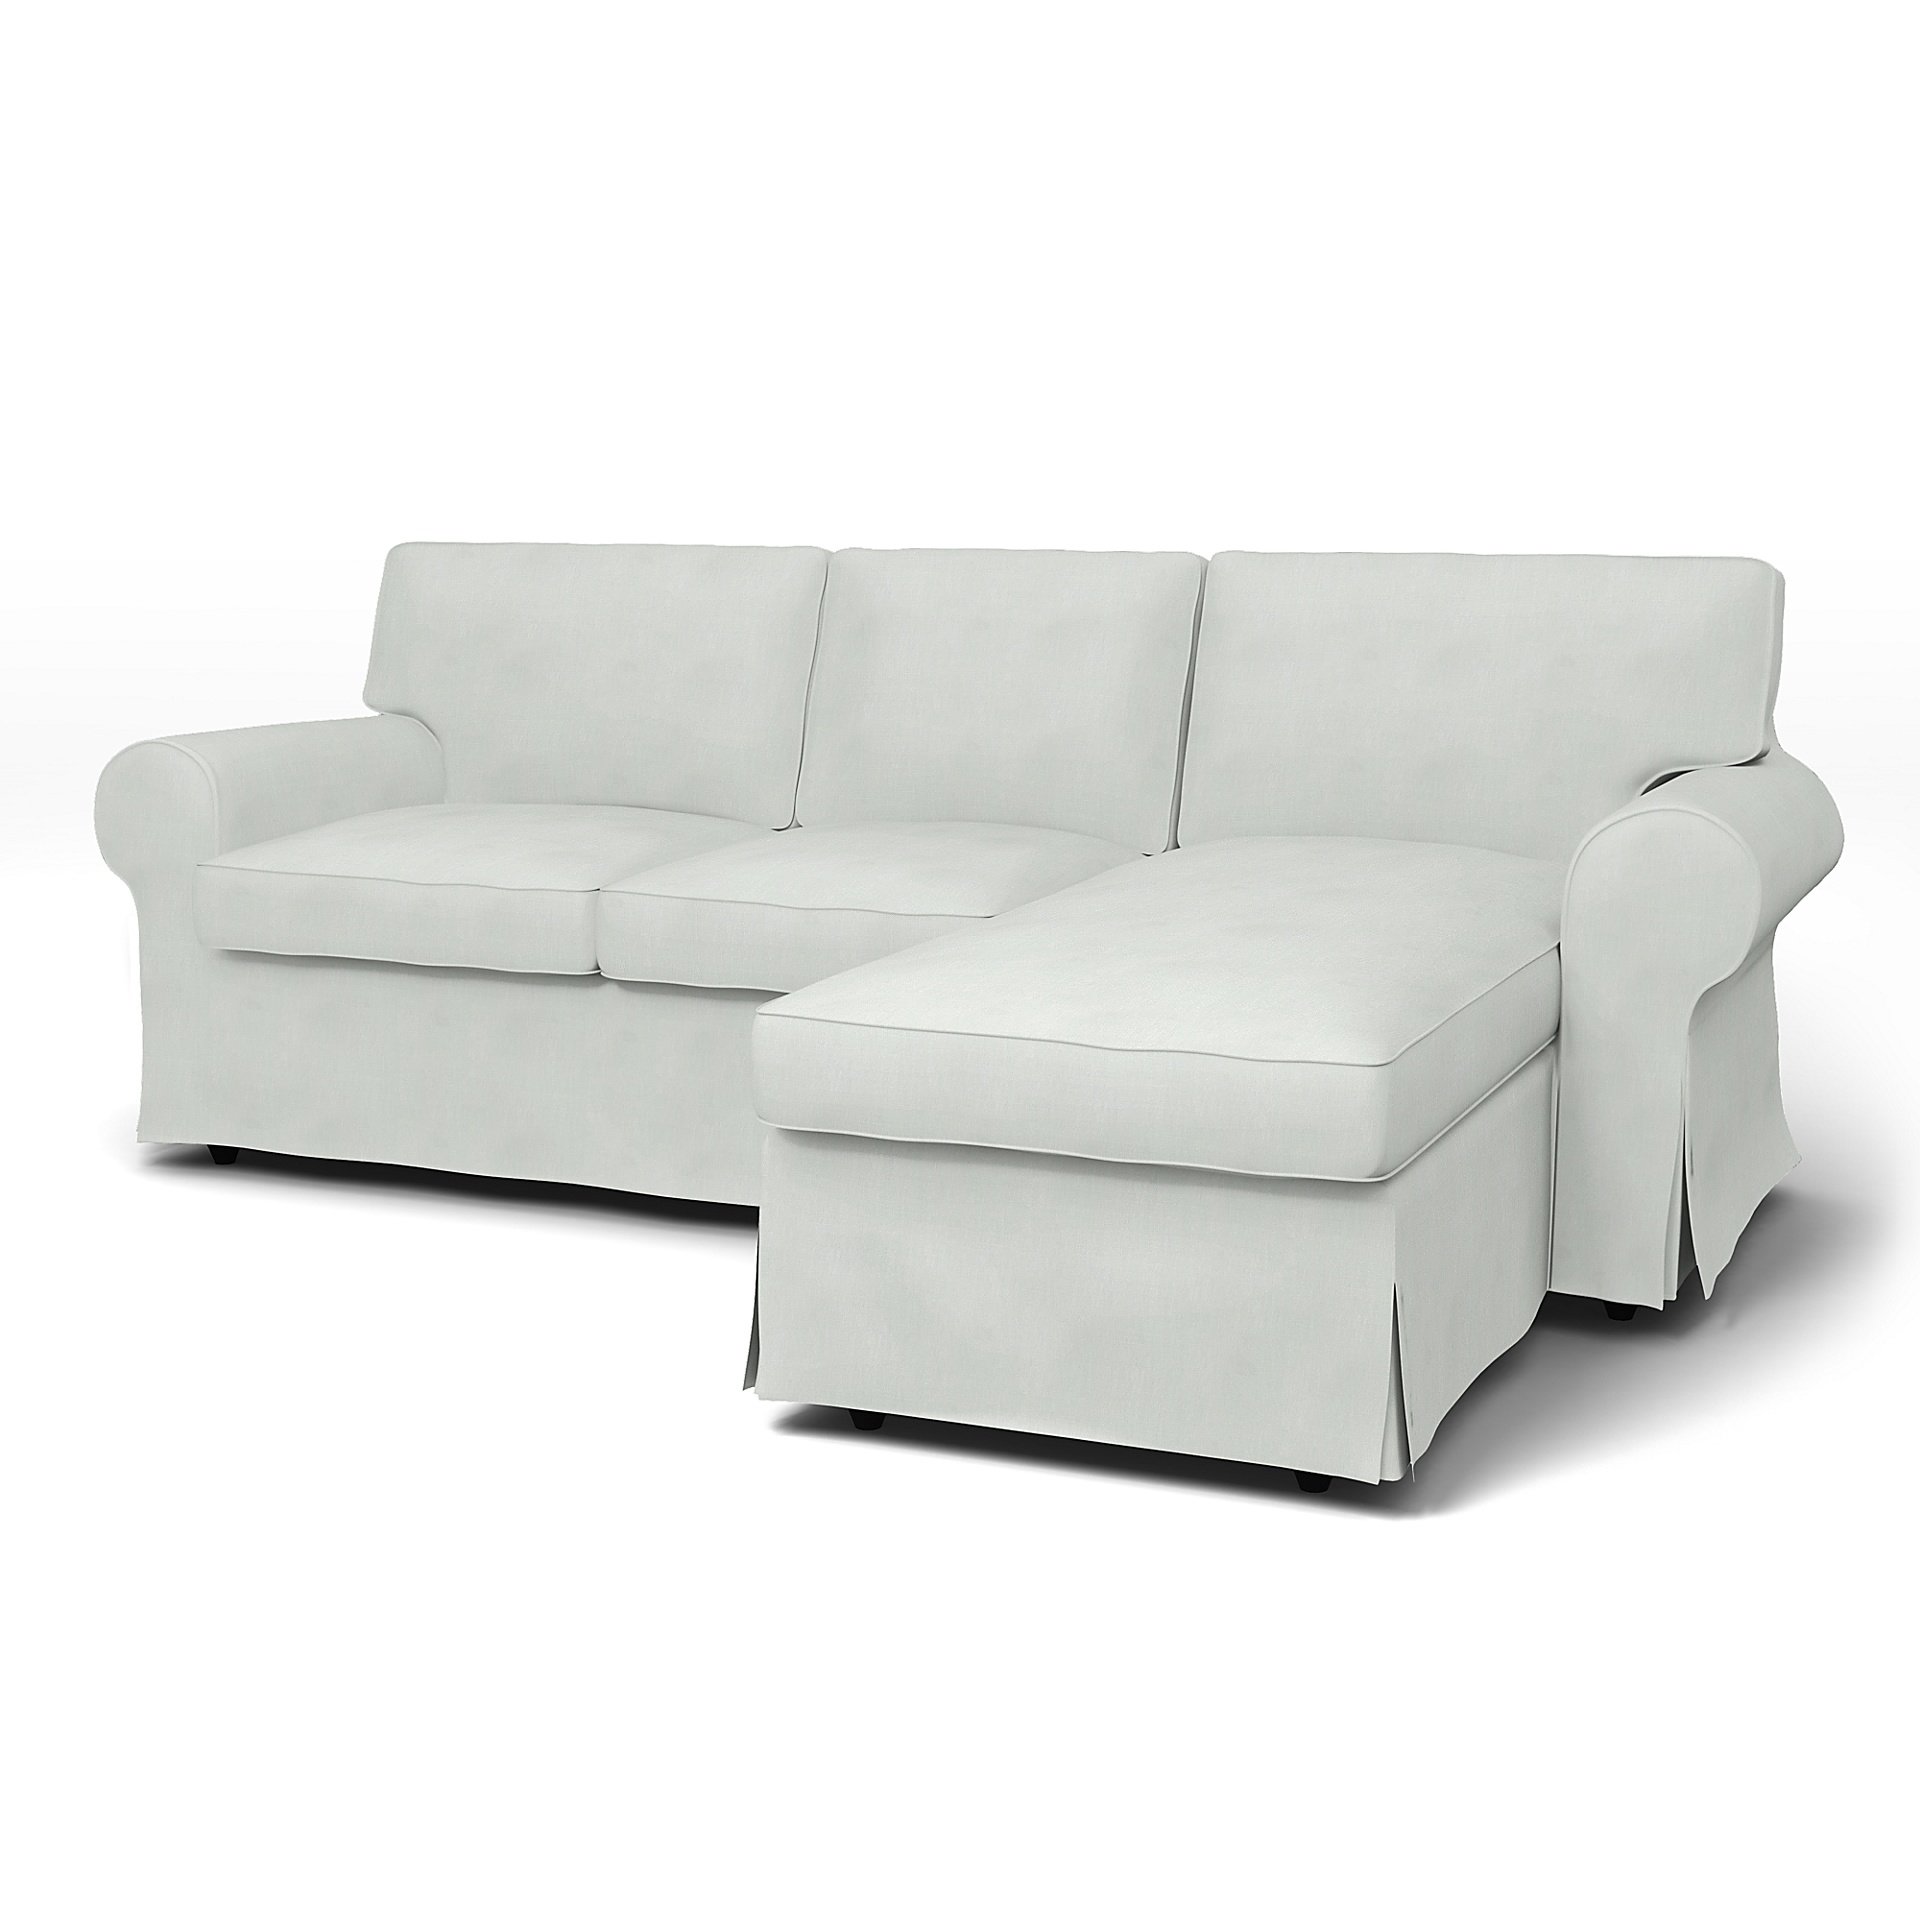 IKEA - Ektorp 3 Seater Sofa with Chaise Cover, Silver Grey, Linen - Bemz